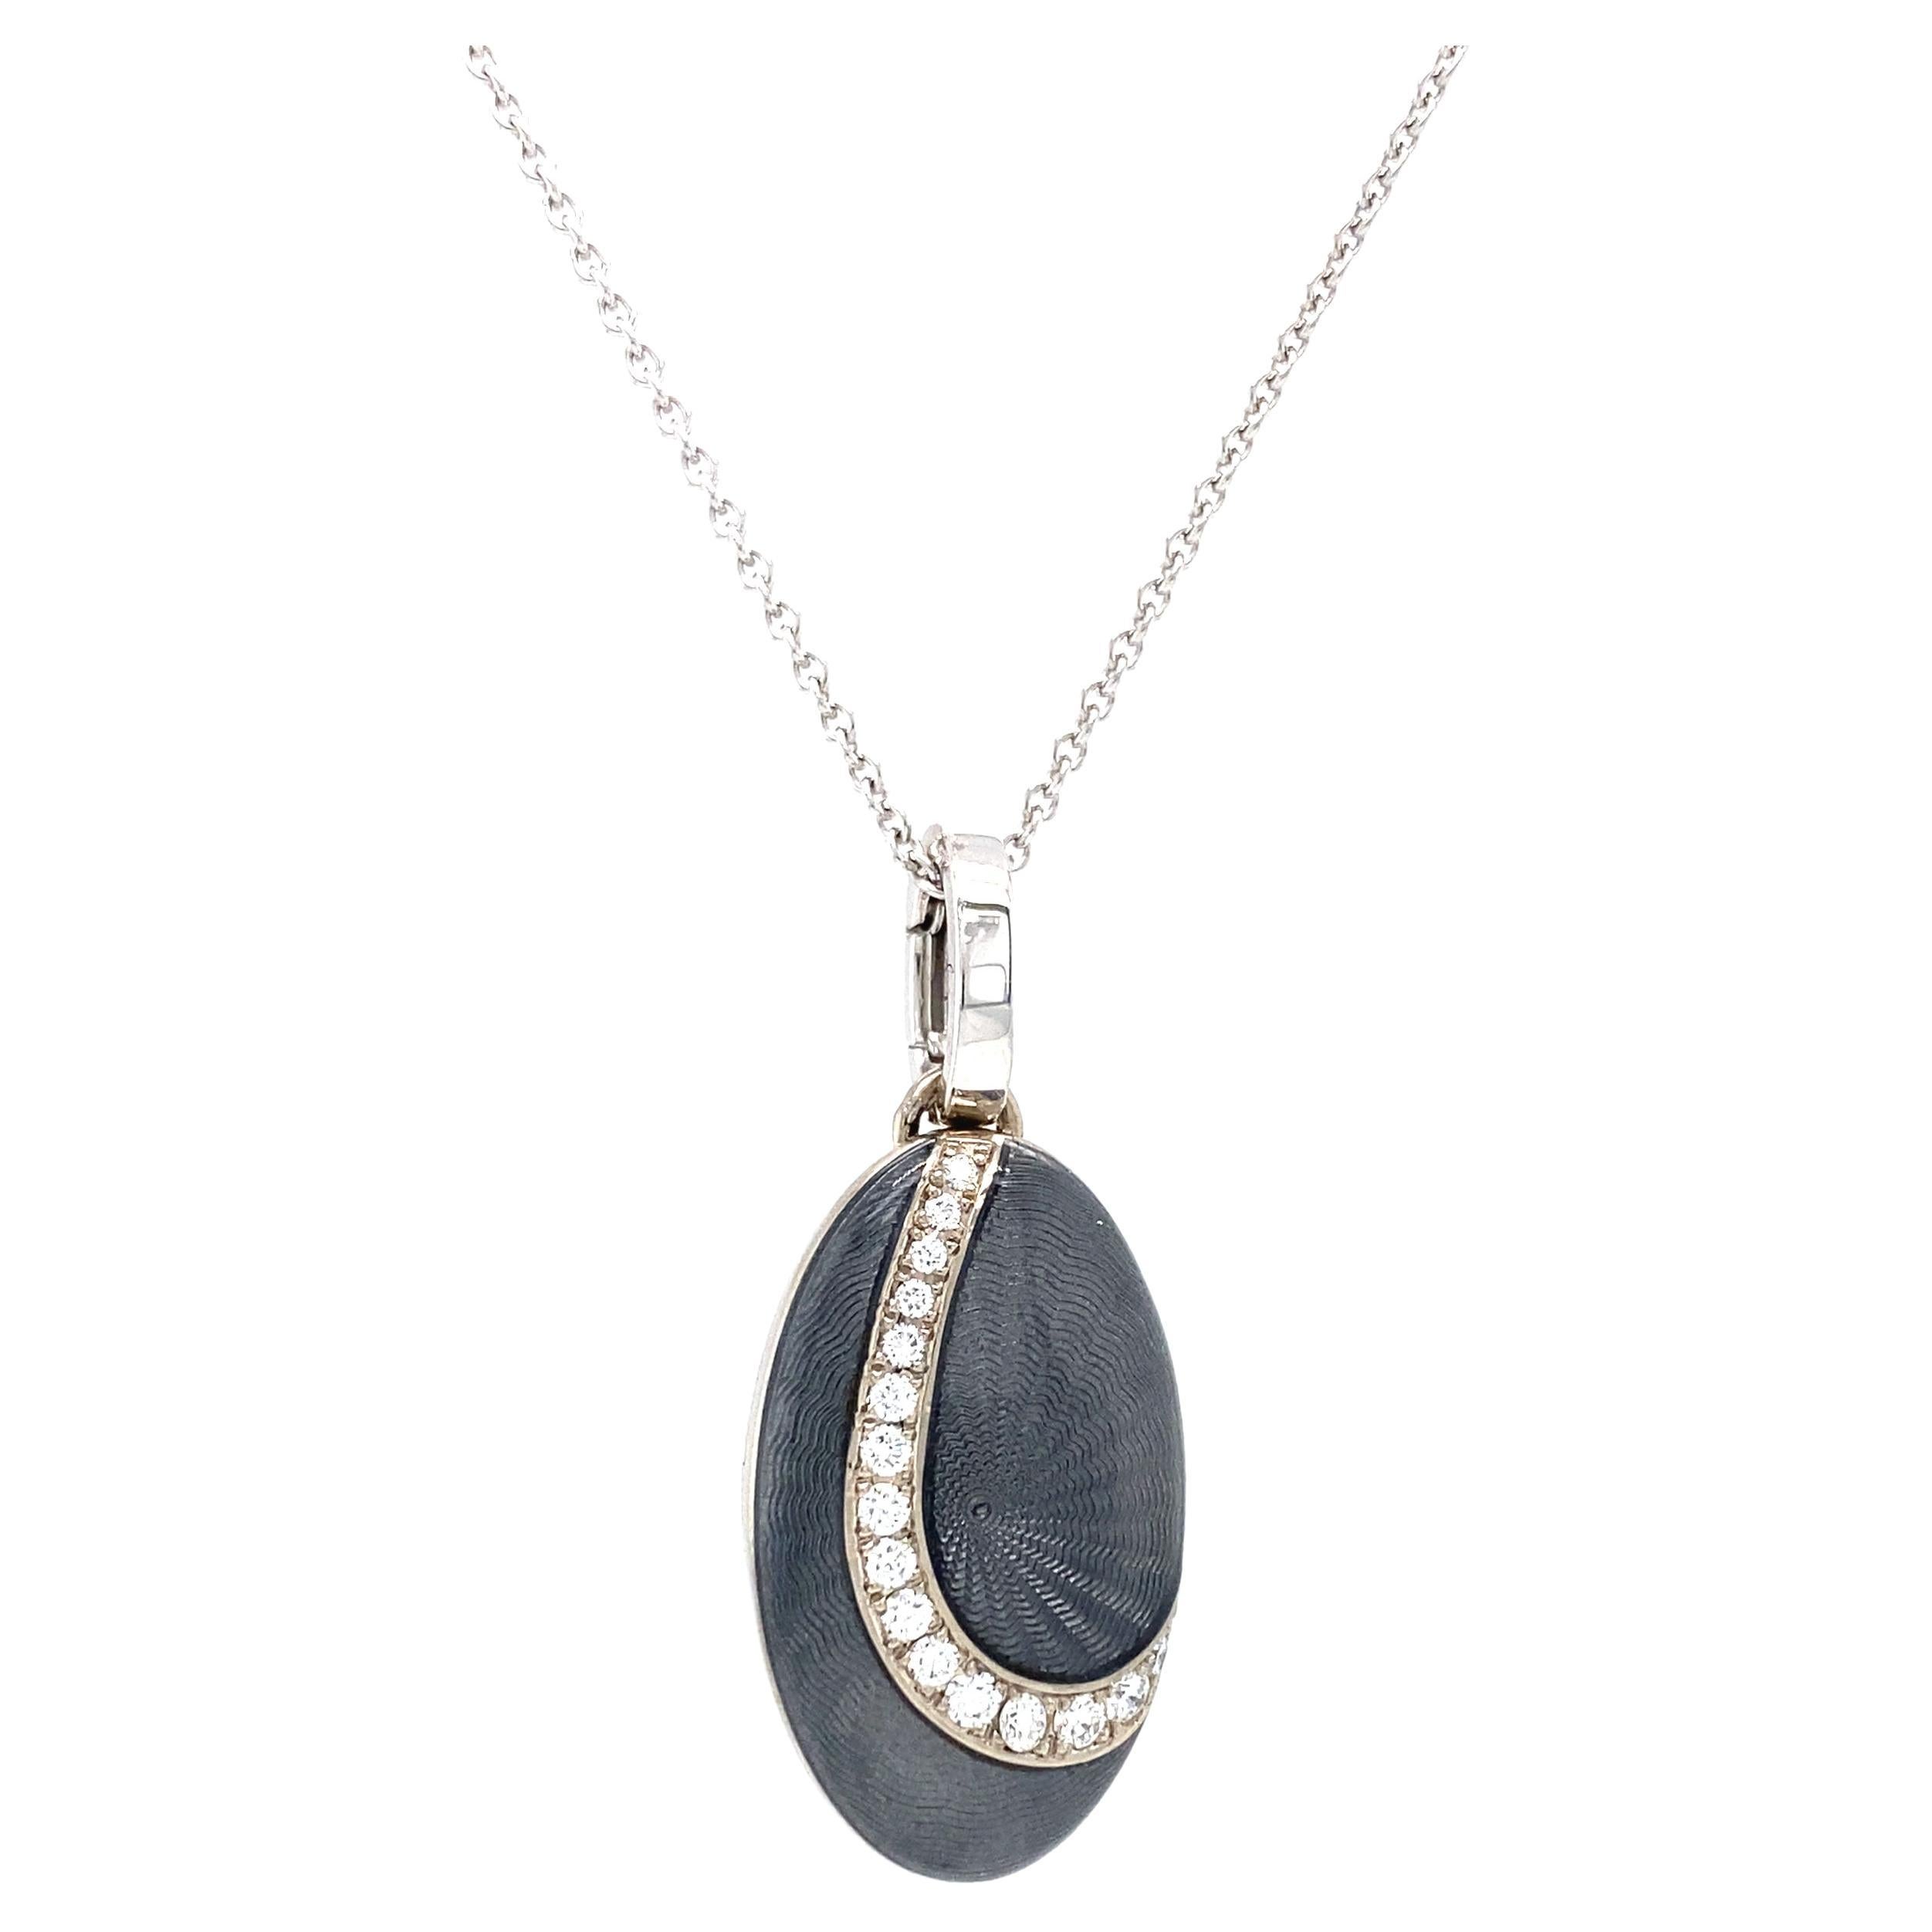 Victor Mayer oval locket pendant necklace 18k white gold, Peacock collection, light grey guilloche enamel, 16 diamonds, total 0.28 ct, G VS, brilliant cut, measurements app. 15.0 mm x 25.0 mm

About the creator Victor Mayer
Victor Mayer is